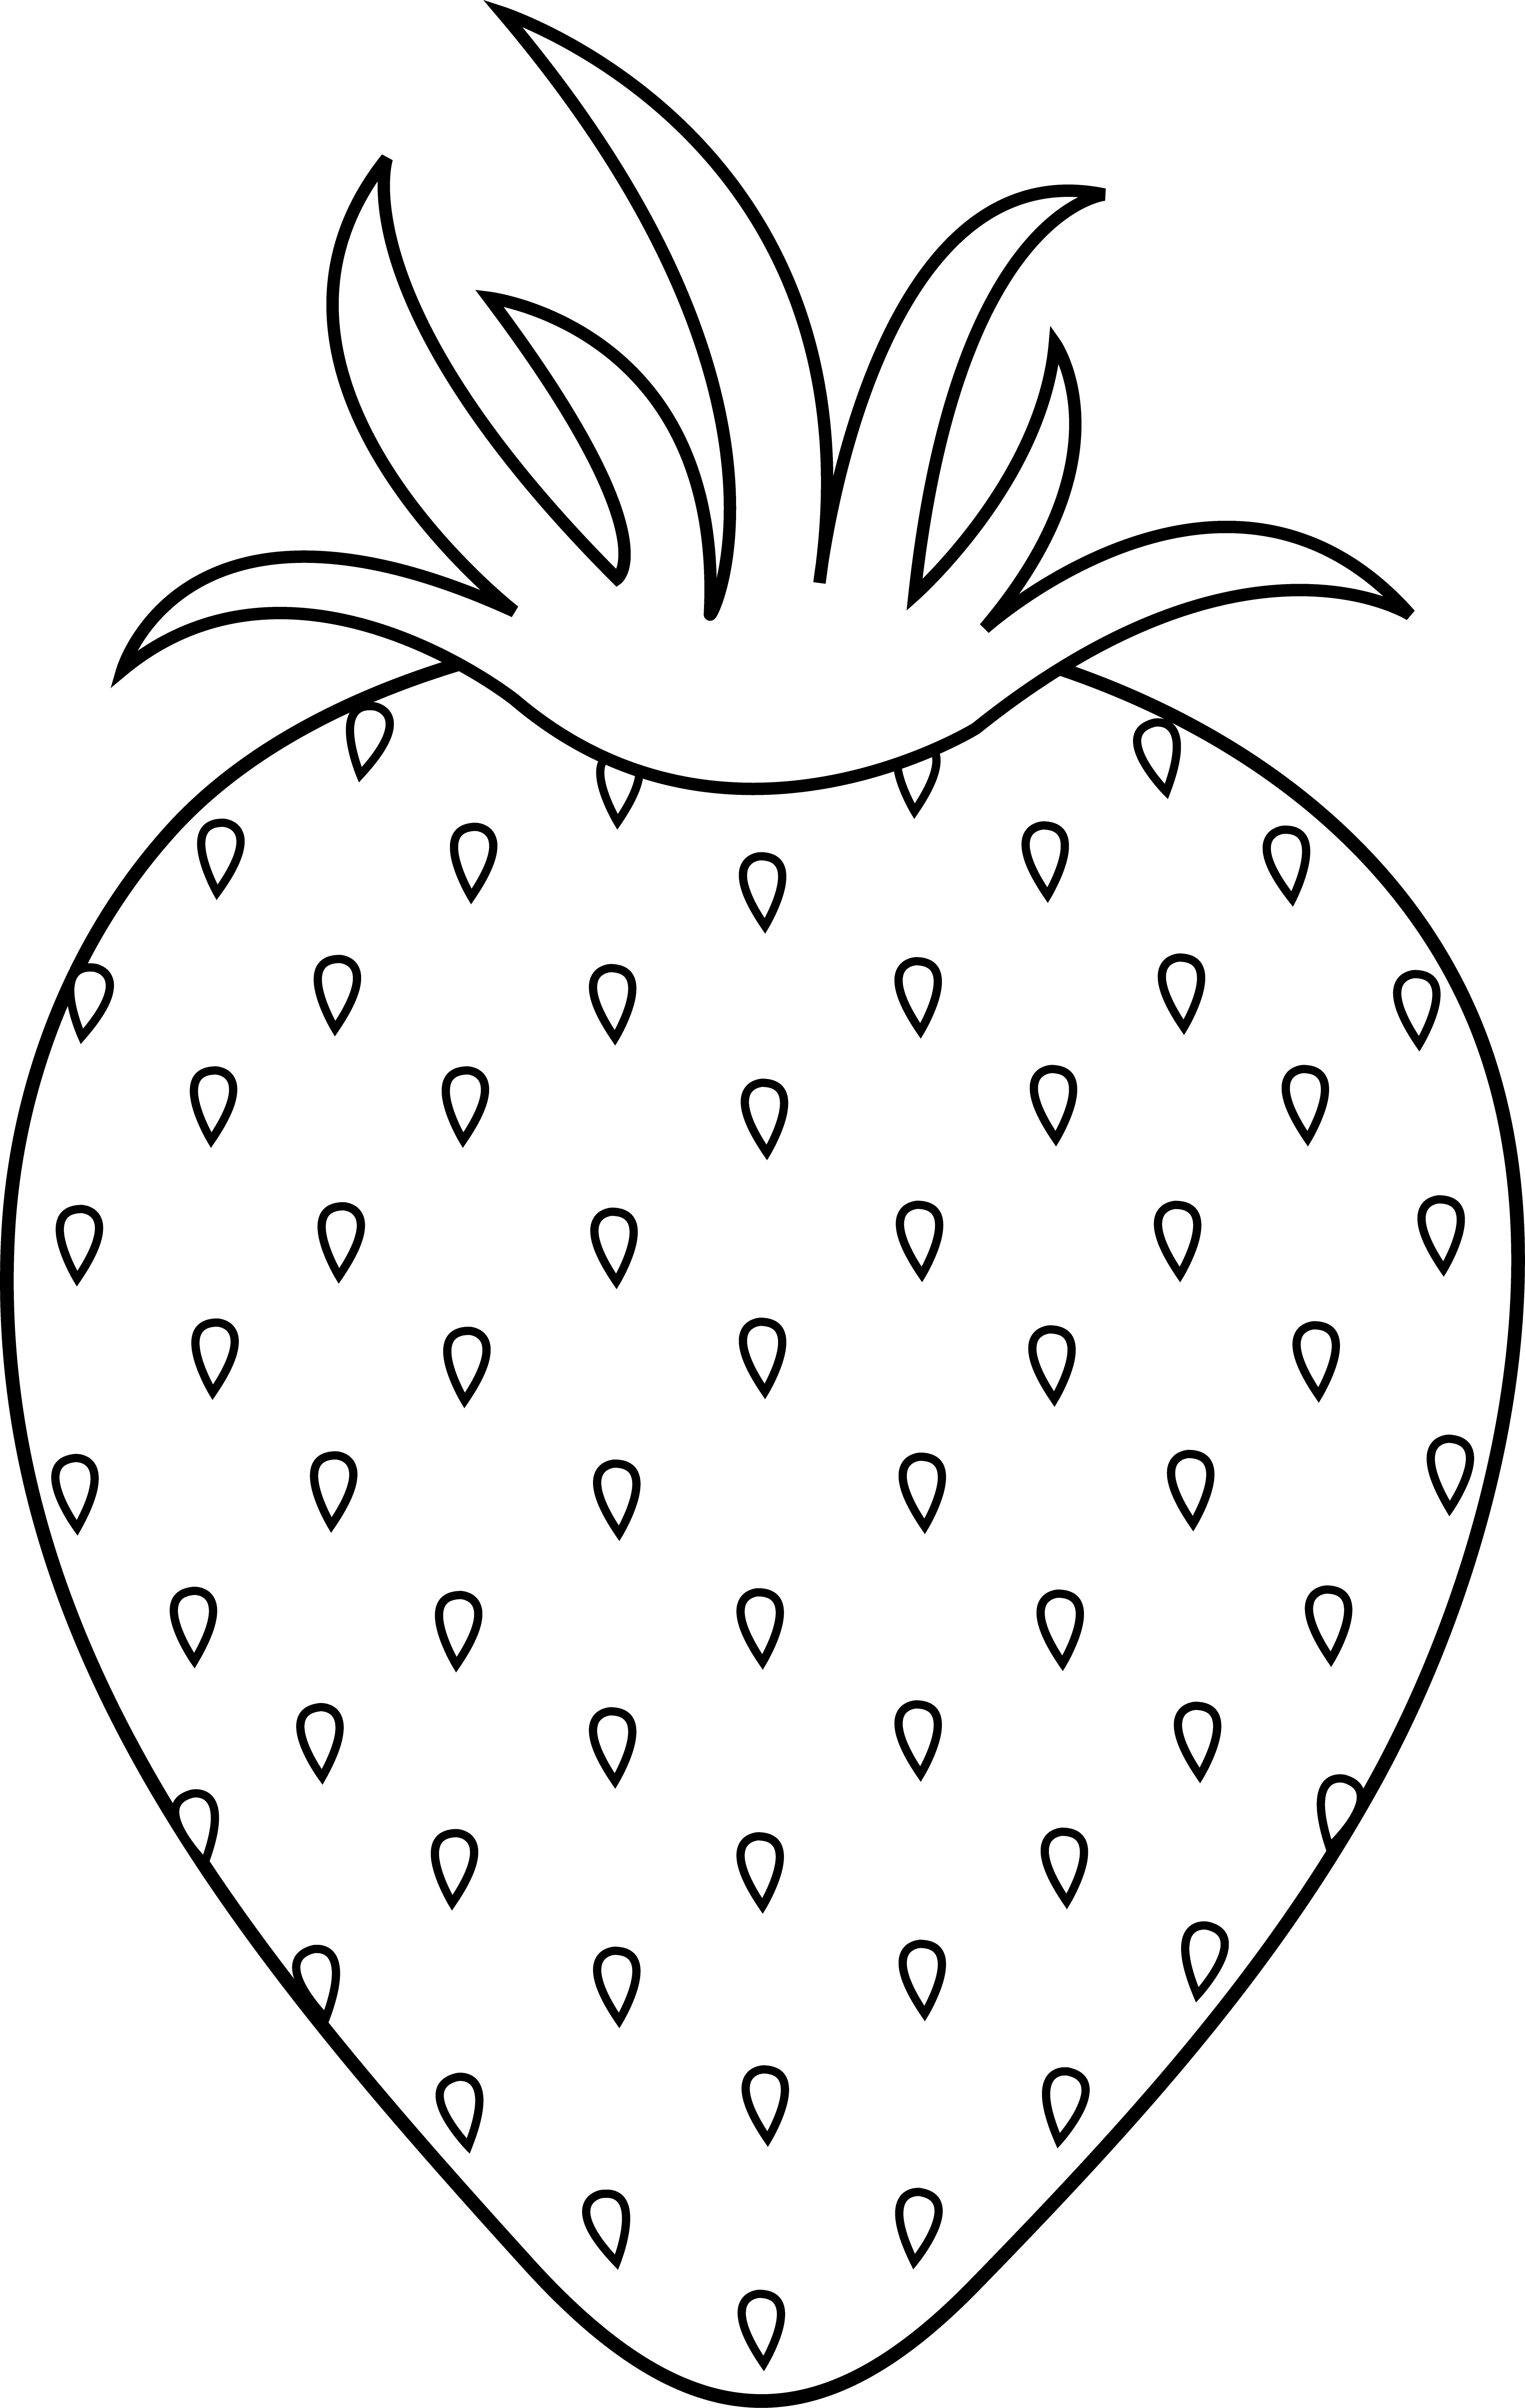 Free Strawberry Cliparts Black, Download Free Strawberry Cliparts Black